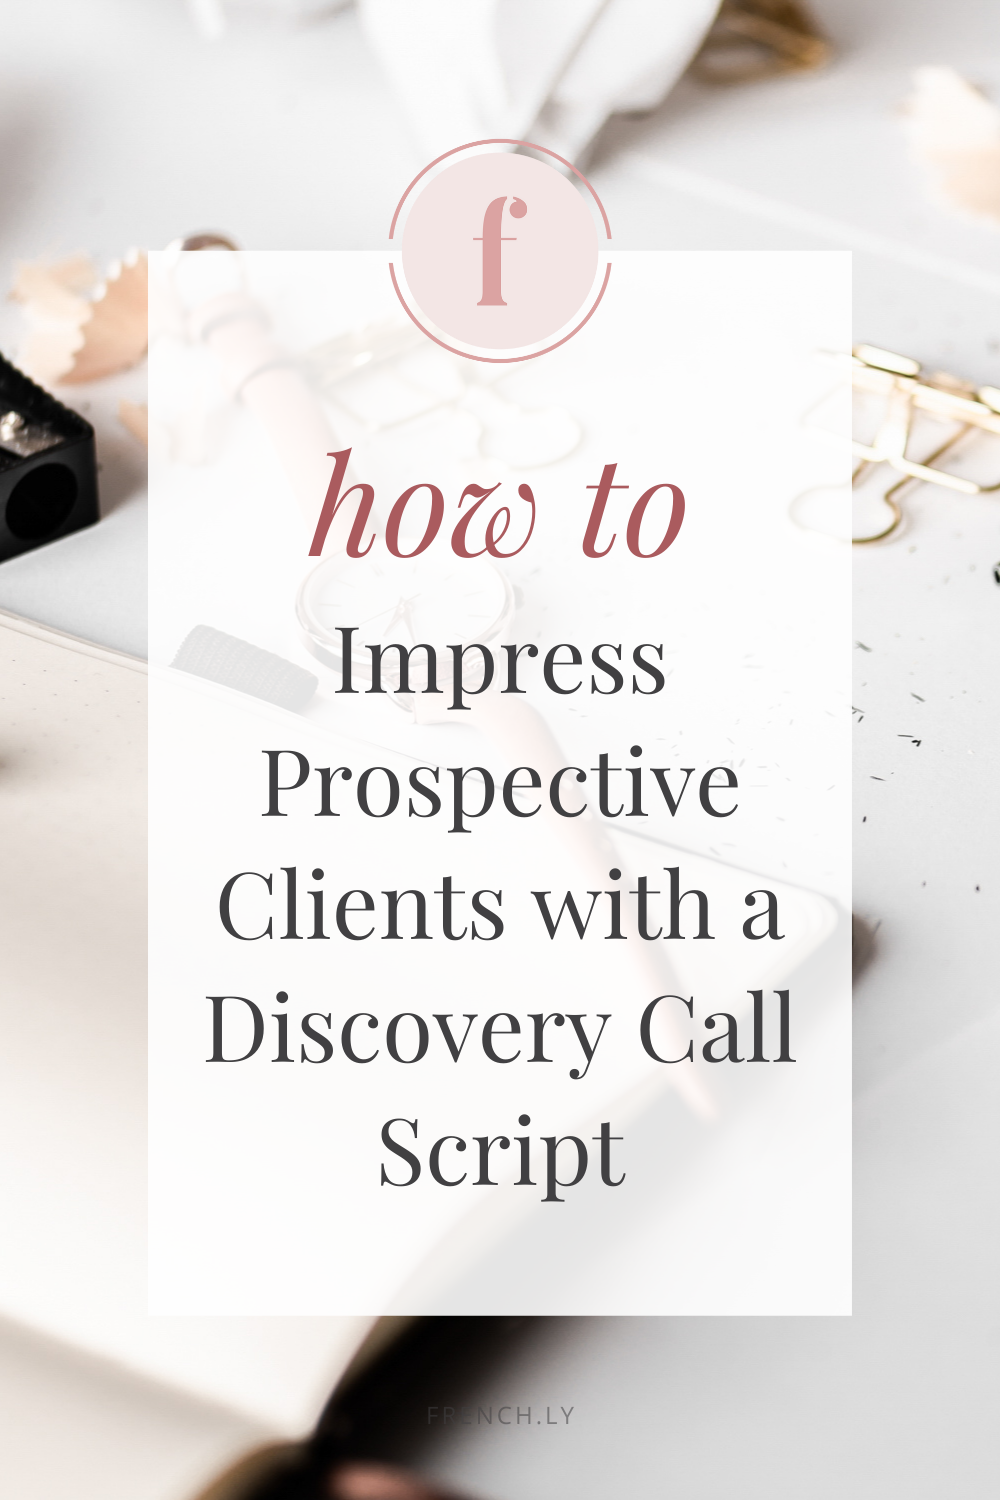 How to Impress Prospective Clients with a Discovery Call Script | Frenchly Food + Product Photography